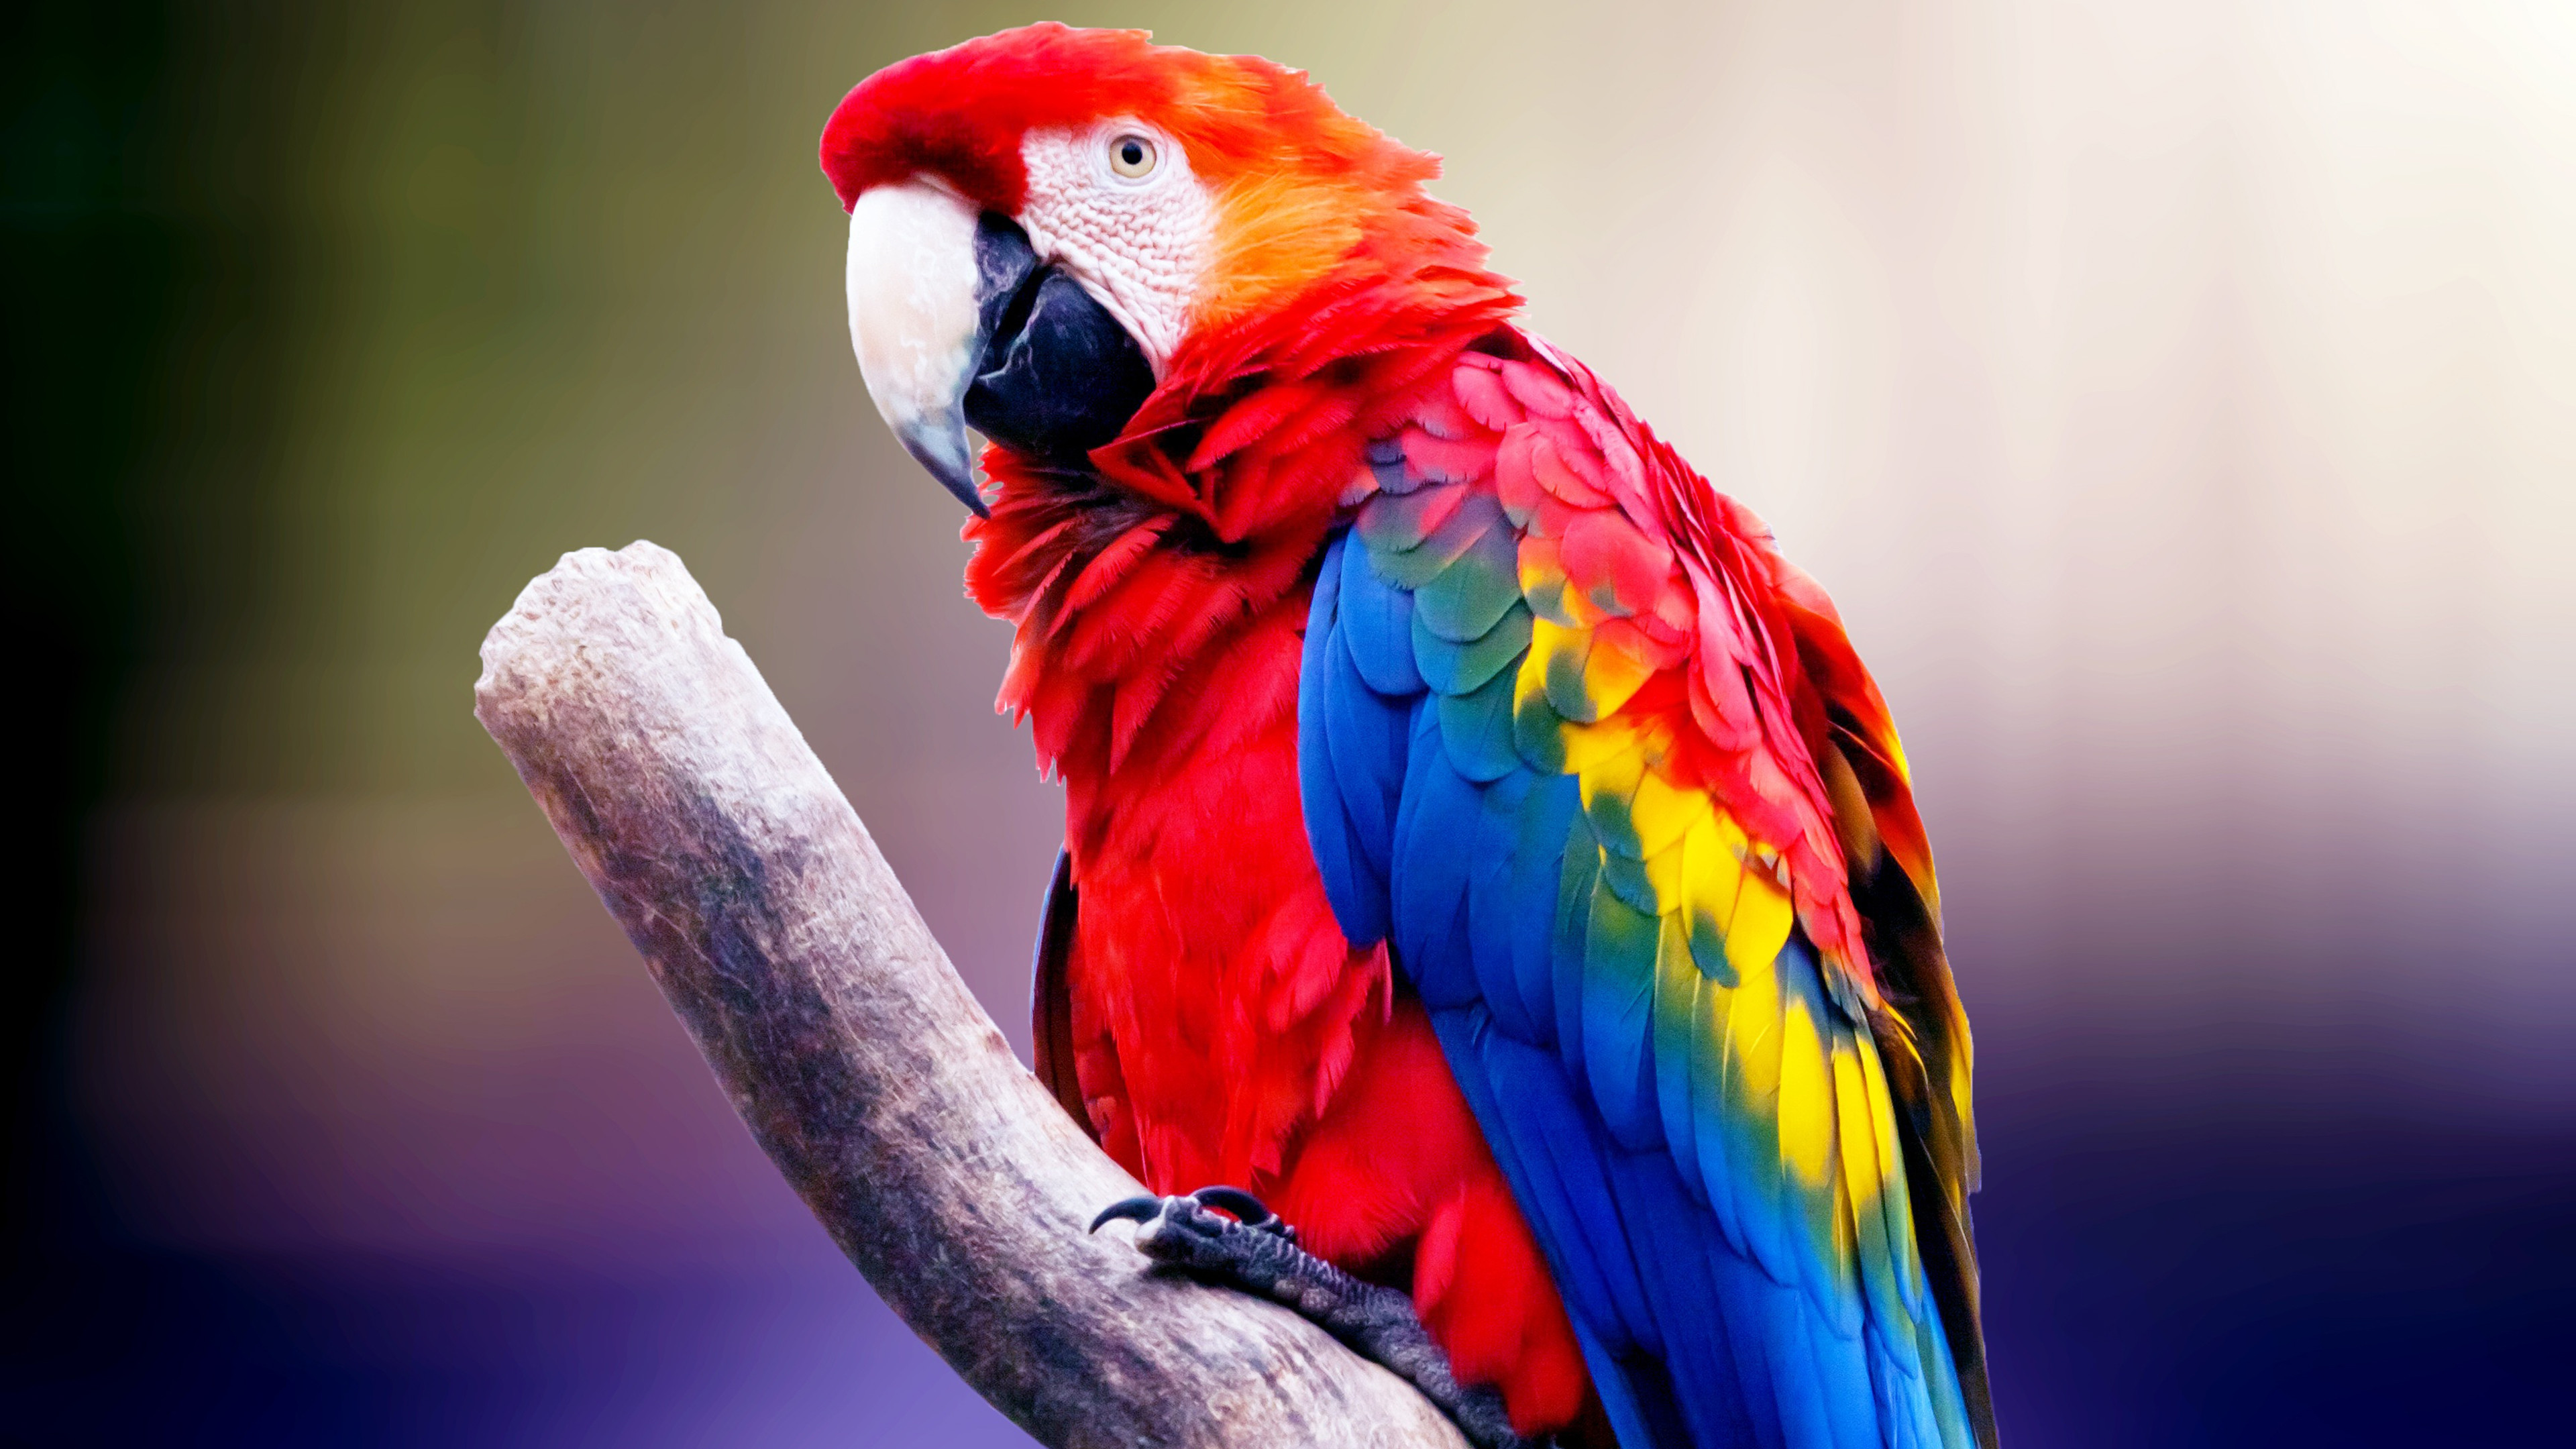 3840x2160, Macaw Parrot 4k 
 Data Id 344943 
 Data - Macaw Parrot Hd Wallpaper For Mobile - HD Wallpaper 